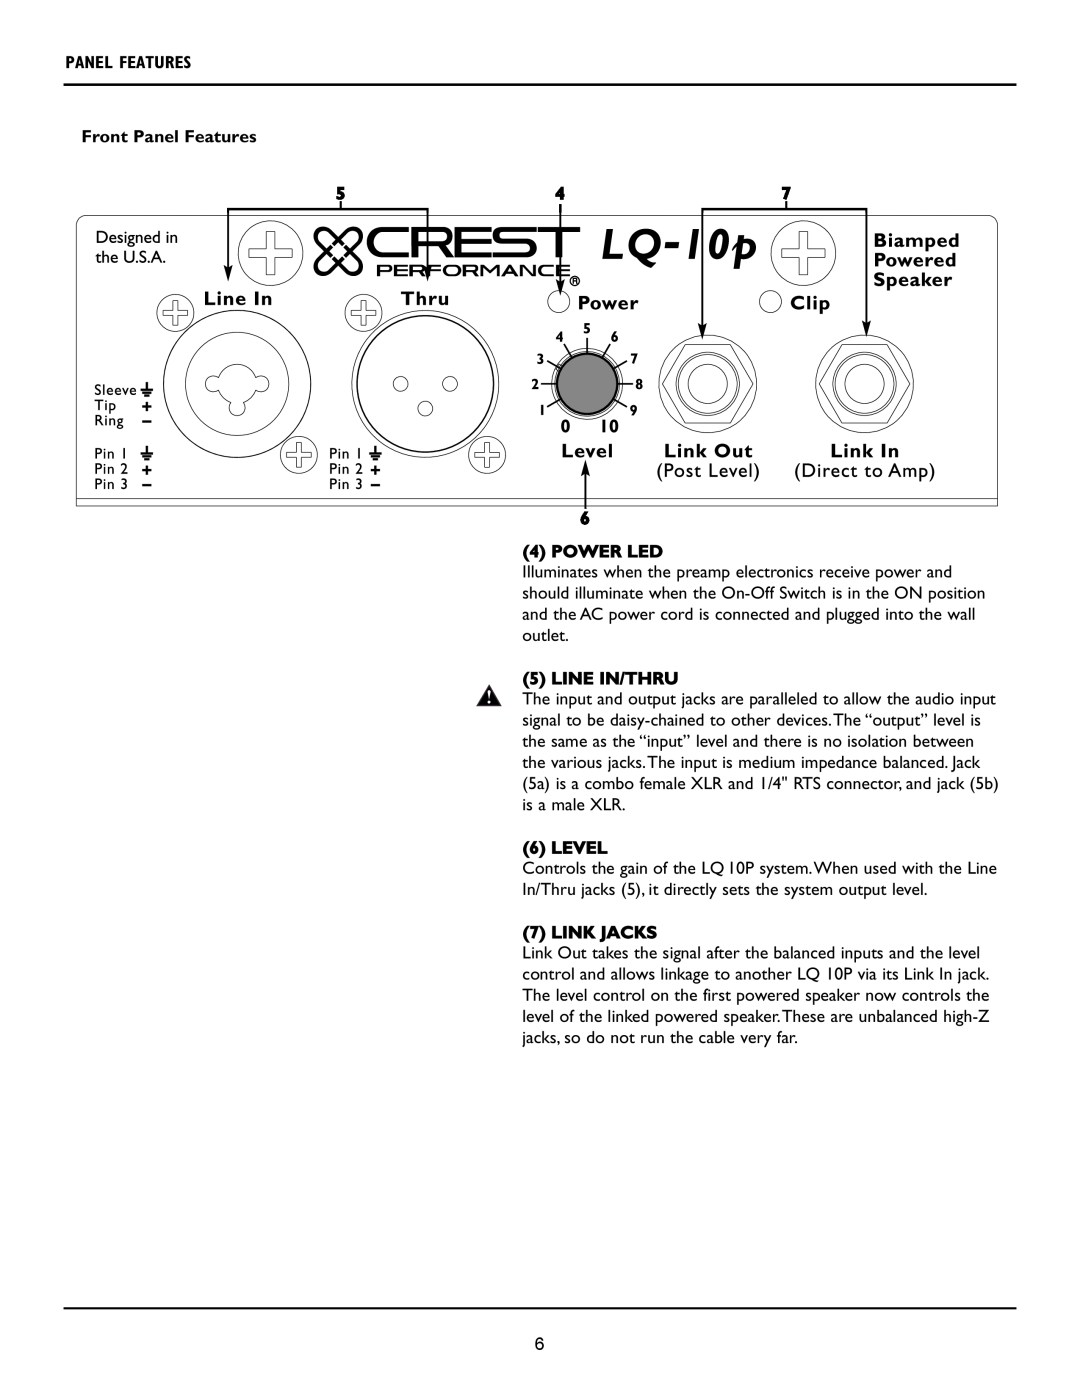 Crest Audio LQ 10P user manual Front Panel Features, 6 4 POWER LED, Line In/Thru, Level, Link Jacks 